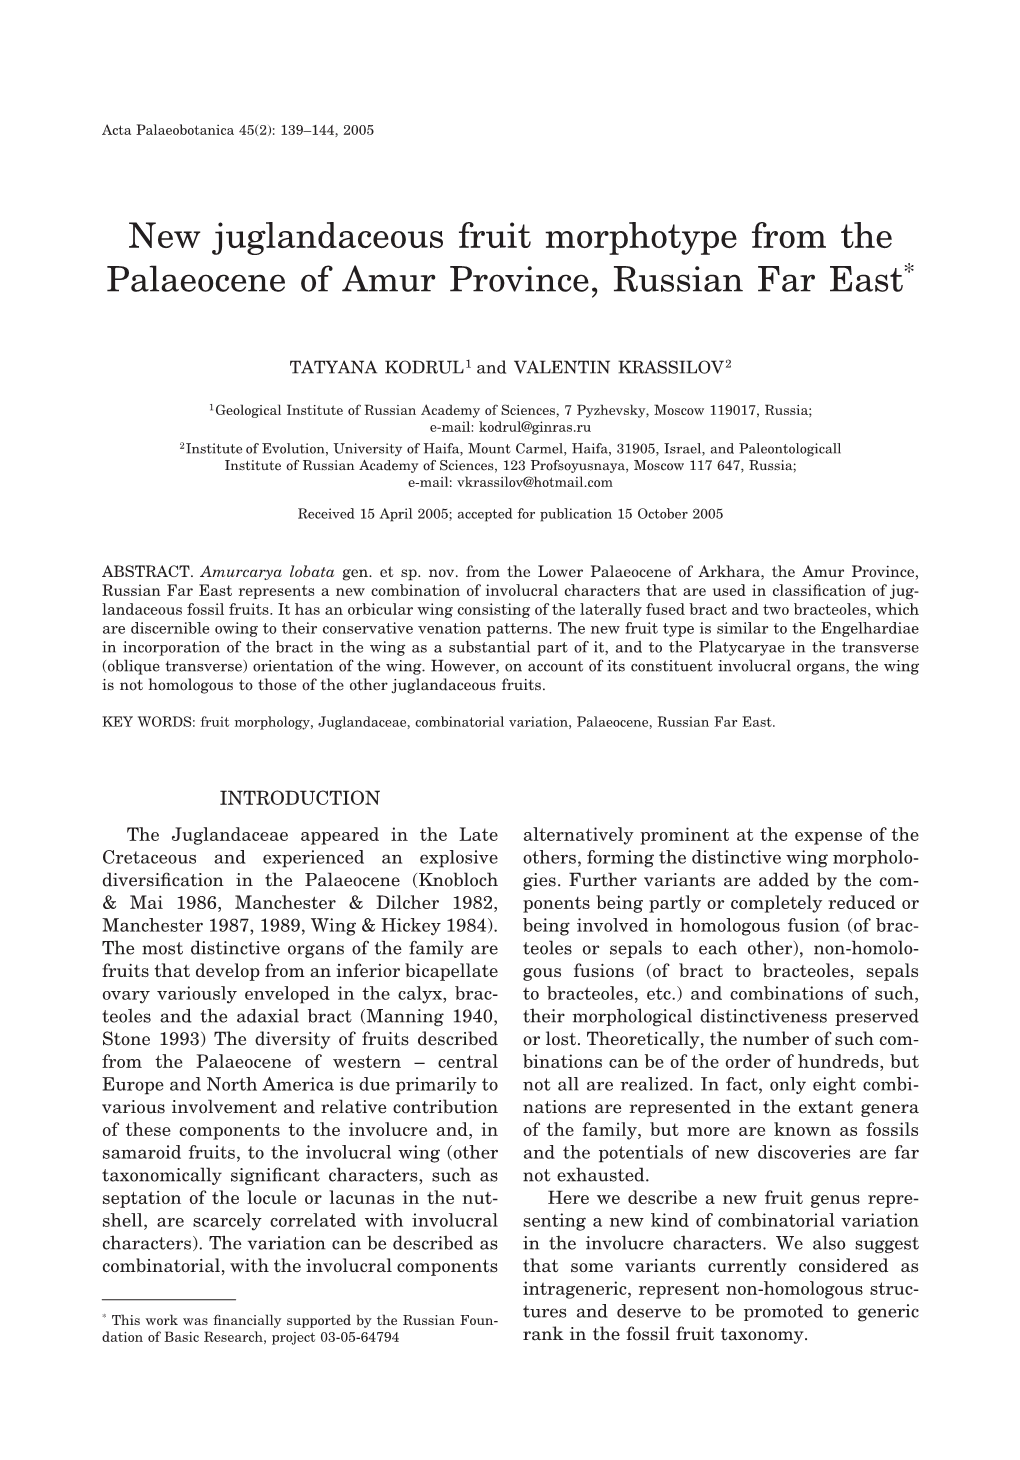 New Juglandaceous Fruit Morphotype from the Palaeocene of Amur Province, Russian Far East*